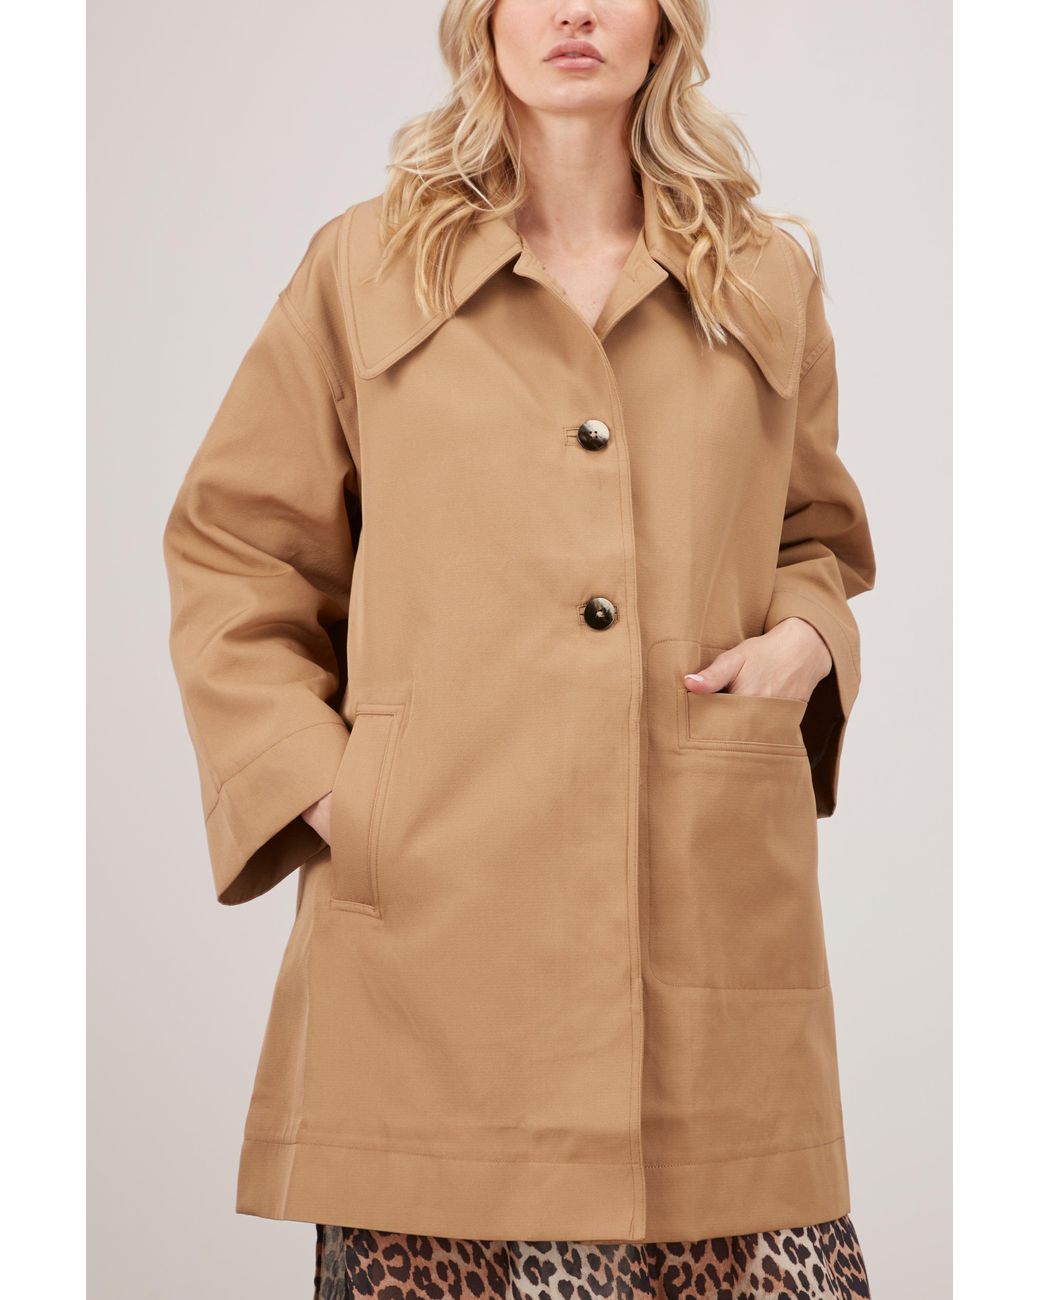 Ganni Synthetic Heavy Twill Oversized Midi Jacket in Natural | Lyst